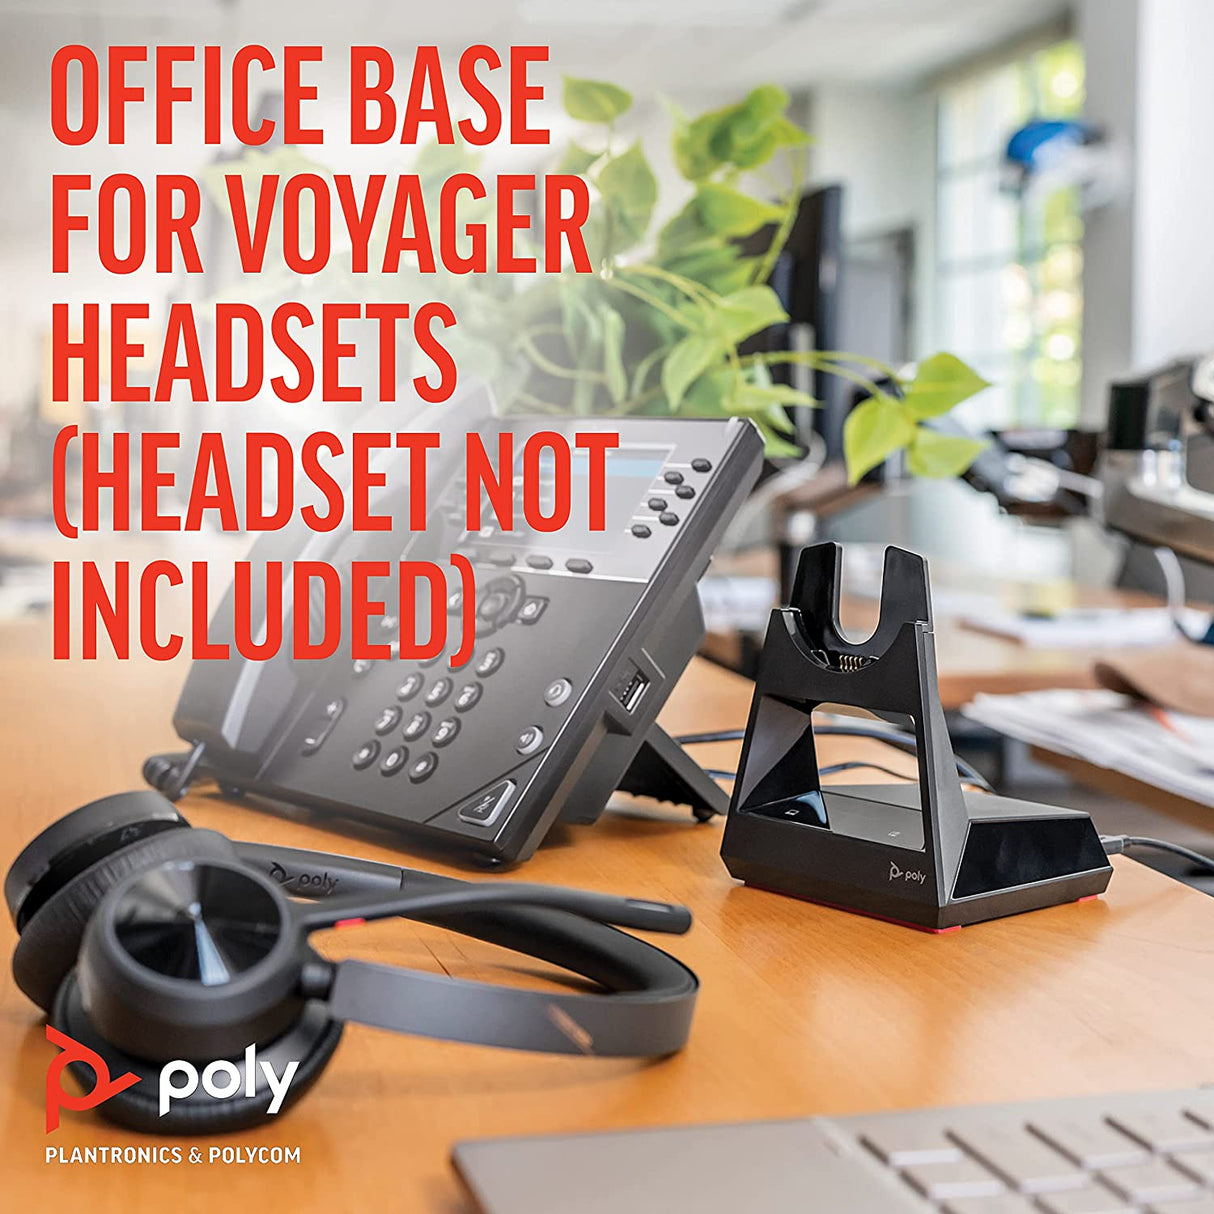 Poly - Voyager Office Base (Plantronics) - Compatible with Voyager Focus 2 and Voyager 4300 UC Series Headsets (Sold Separately) - Connect to PC/Mac, Deskphone, &amp; Cell Phone Standard Version Office Base (Headset Not Included)